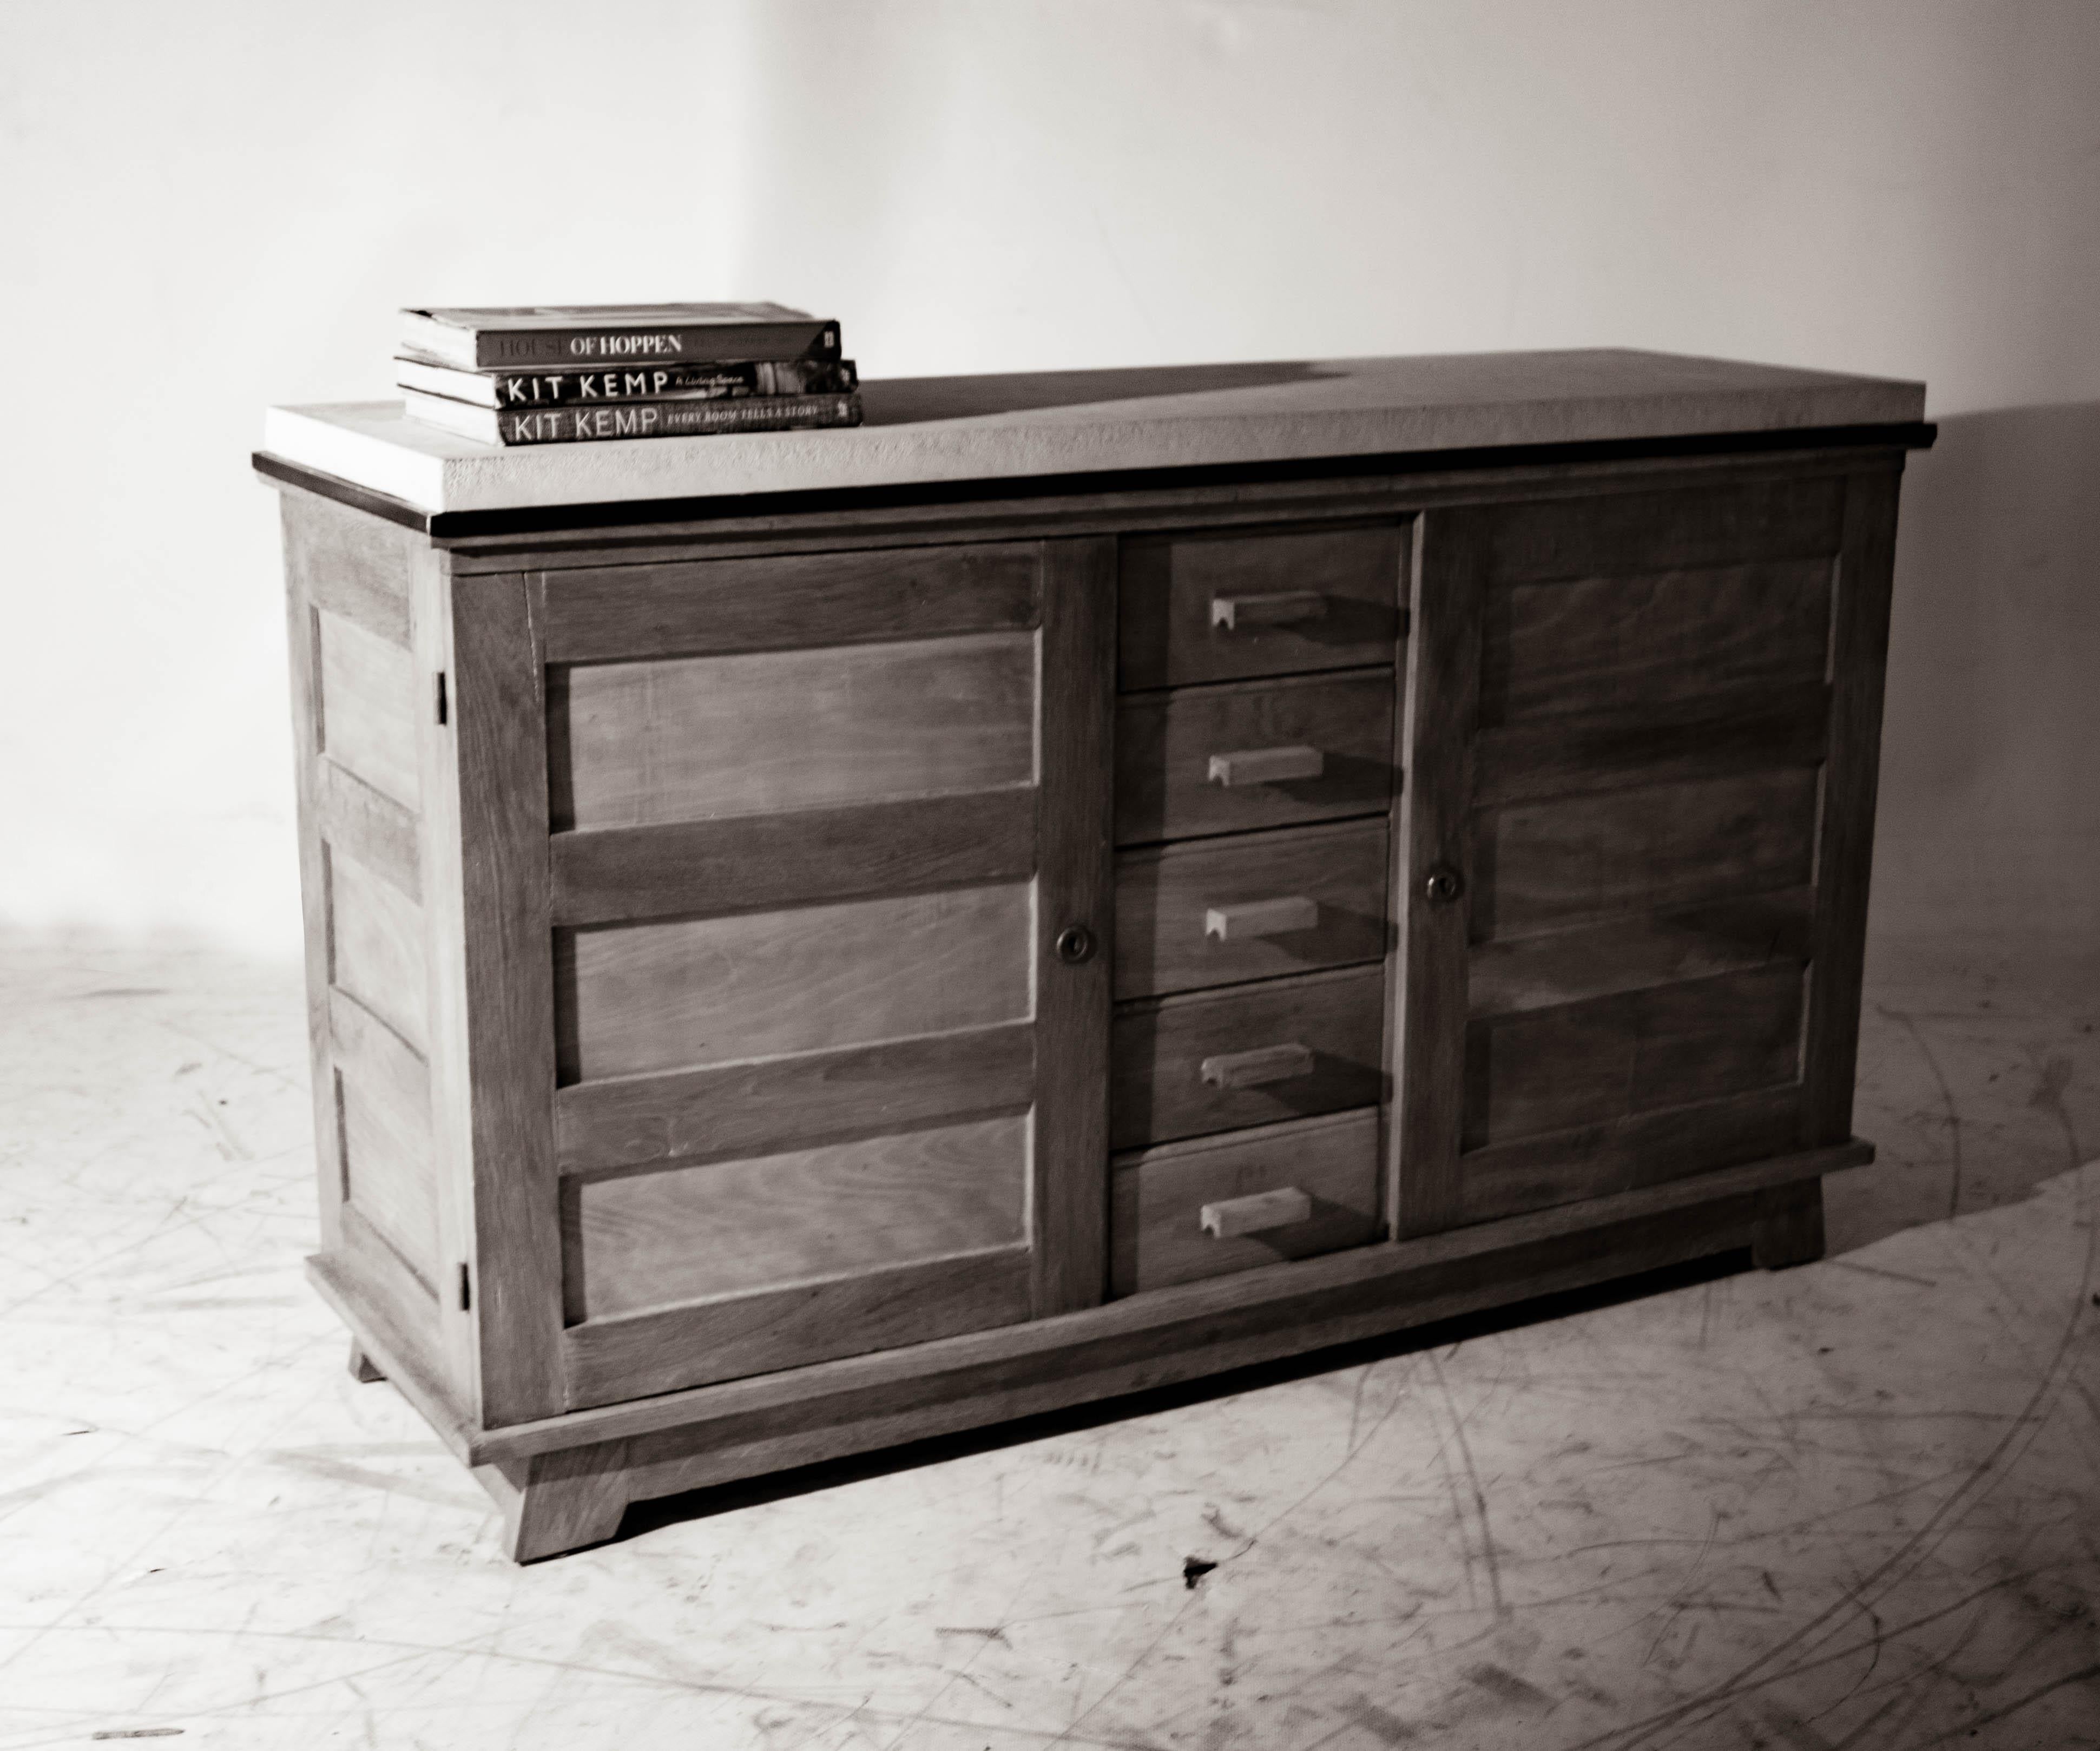 Vintage French Server in Bleached Pine and Oak with Steel Top Band w/ Heavily Weathered Limestone Top.

This piece is a part of Brendan Bass’s one-of-a-kind collection, Le Monde. French for “The World”, the Le Monde collection is made up of rare and